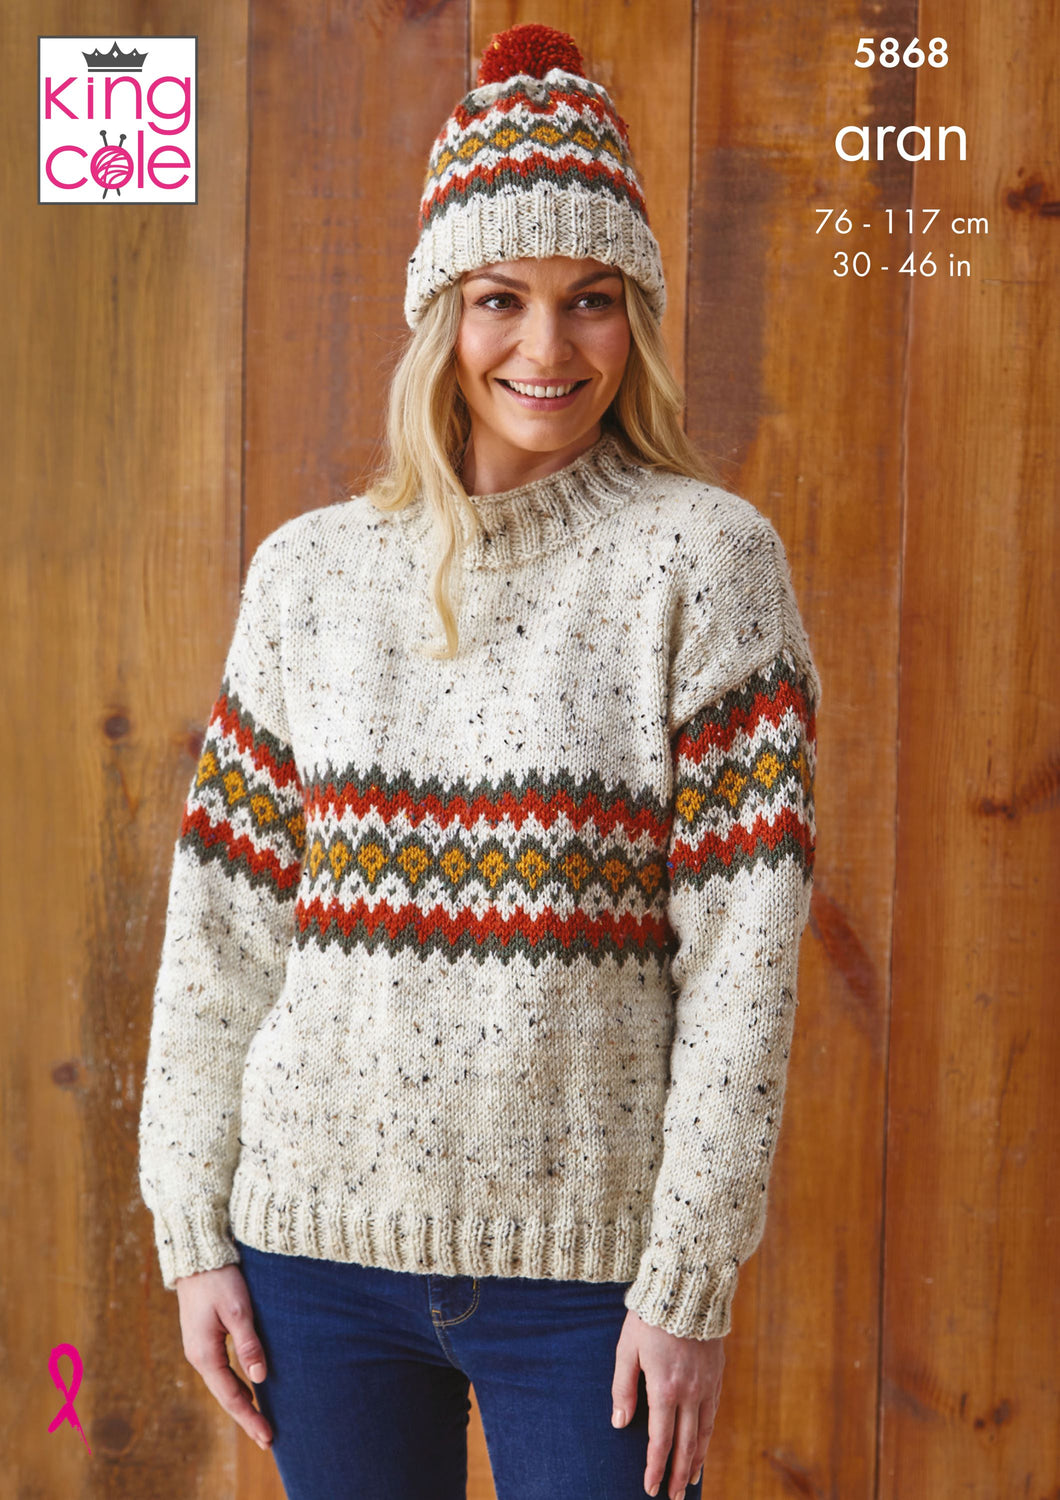 Sweater & Hats Knitted in Fashion Aran 5868